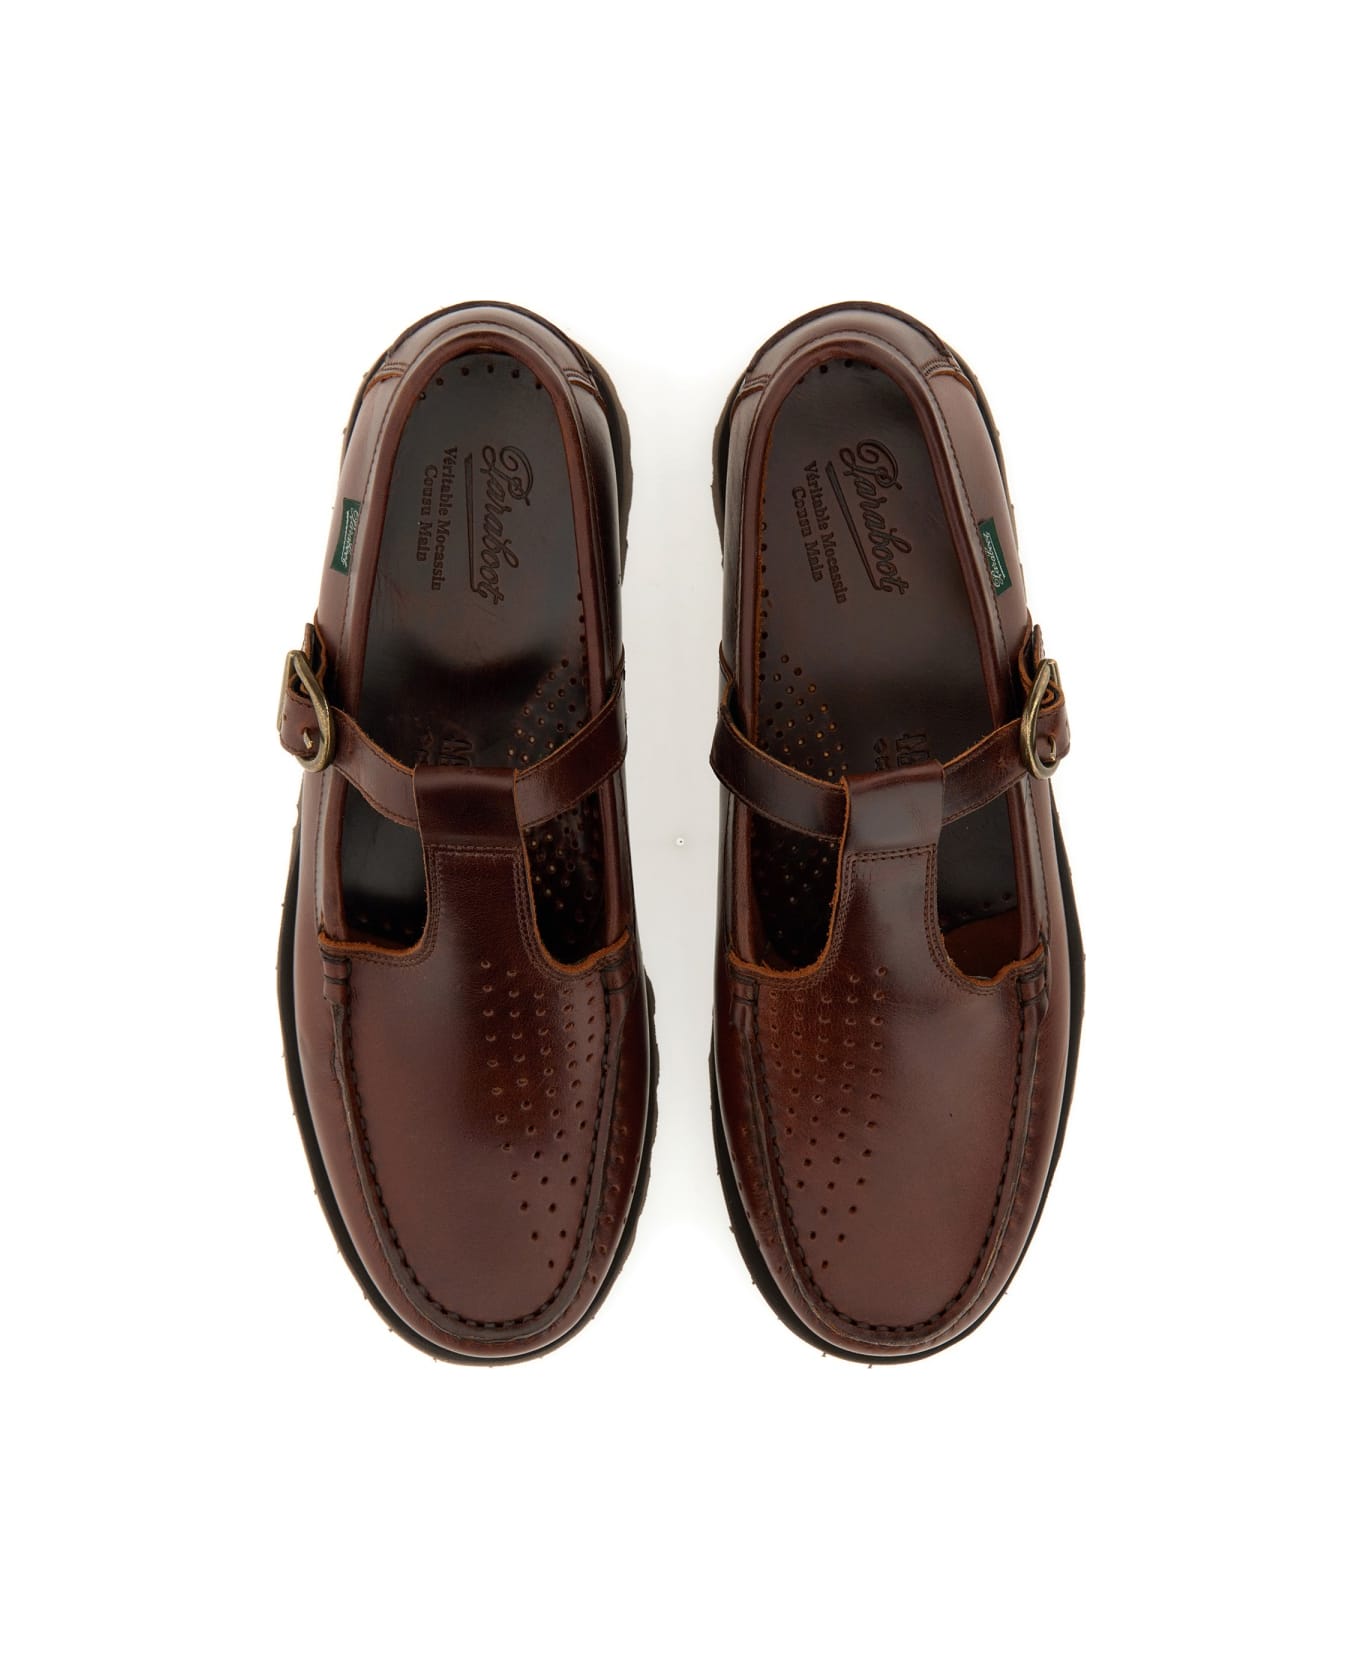 Paraboot Babord Loafer - BROWN ローファー＆デッキシューズ